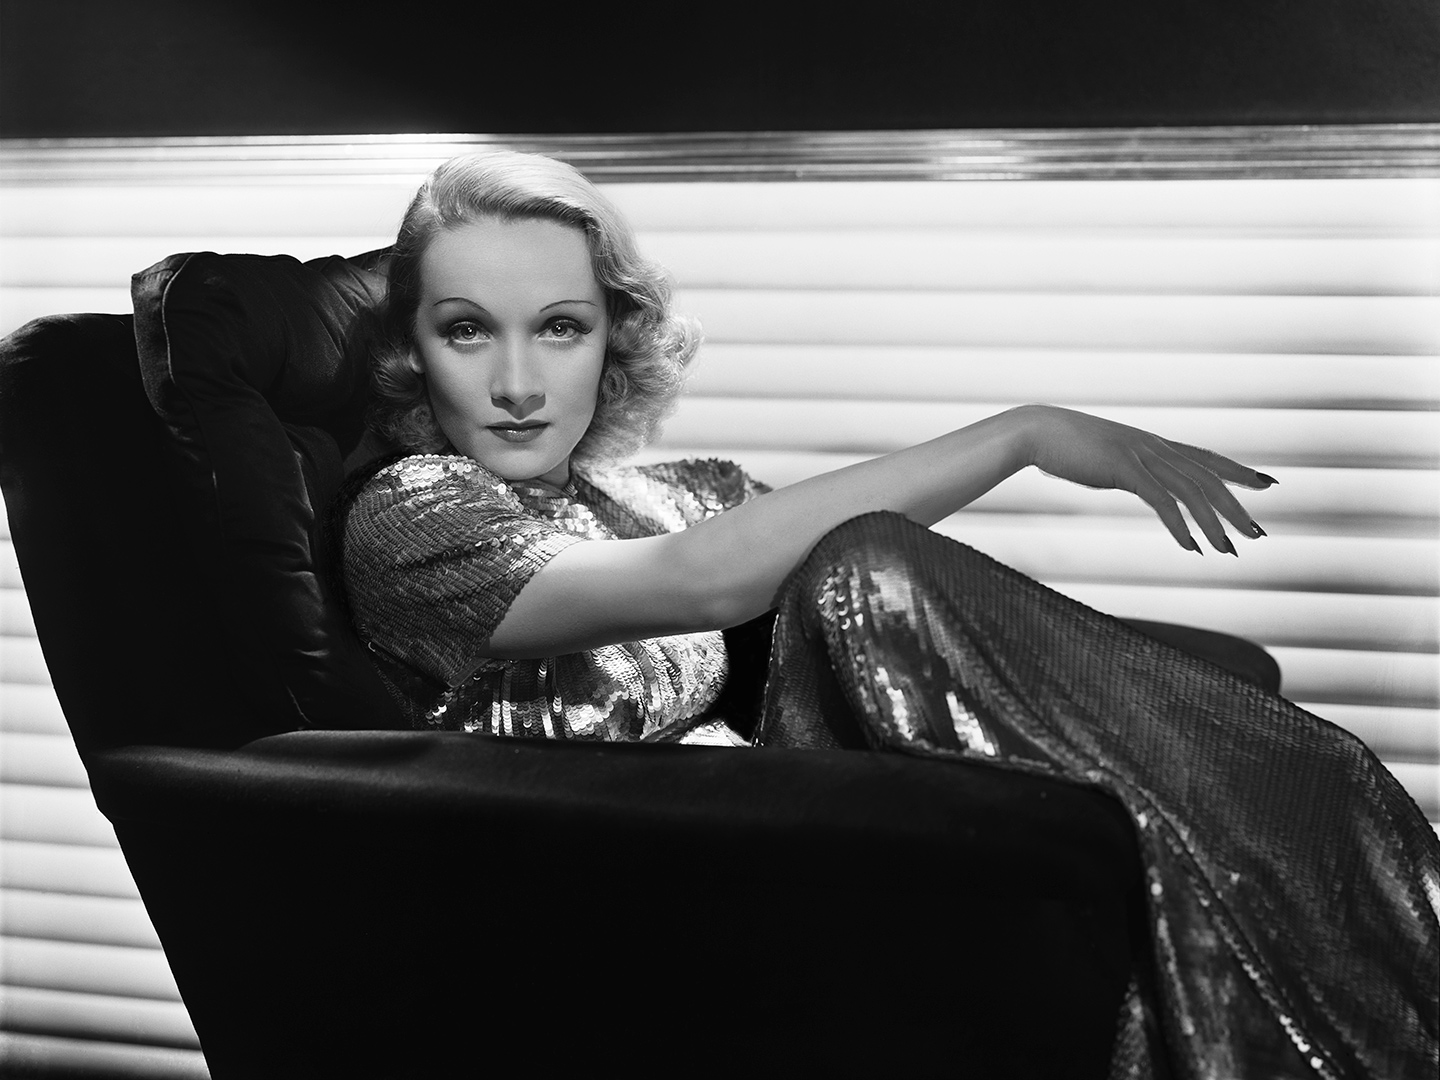 Marlene Dietrich: Dressed for the Image